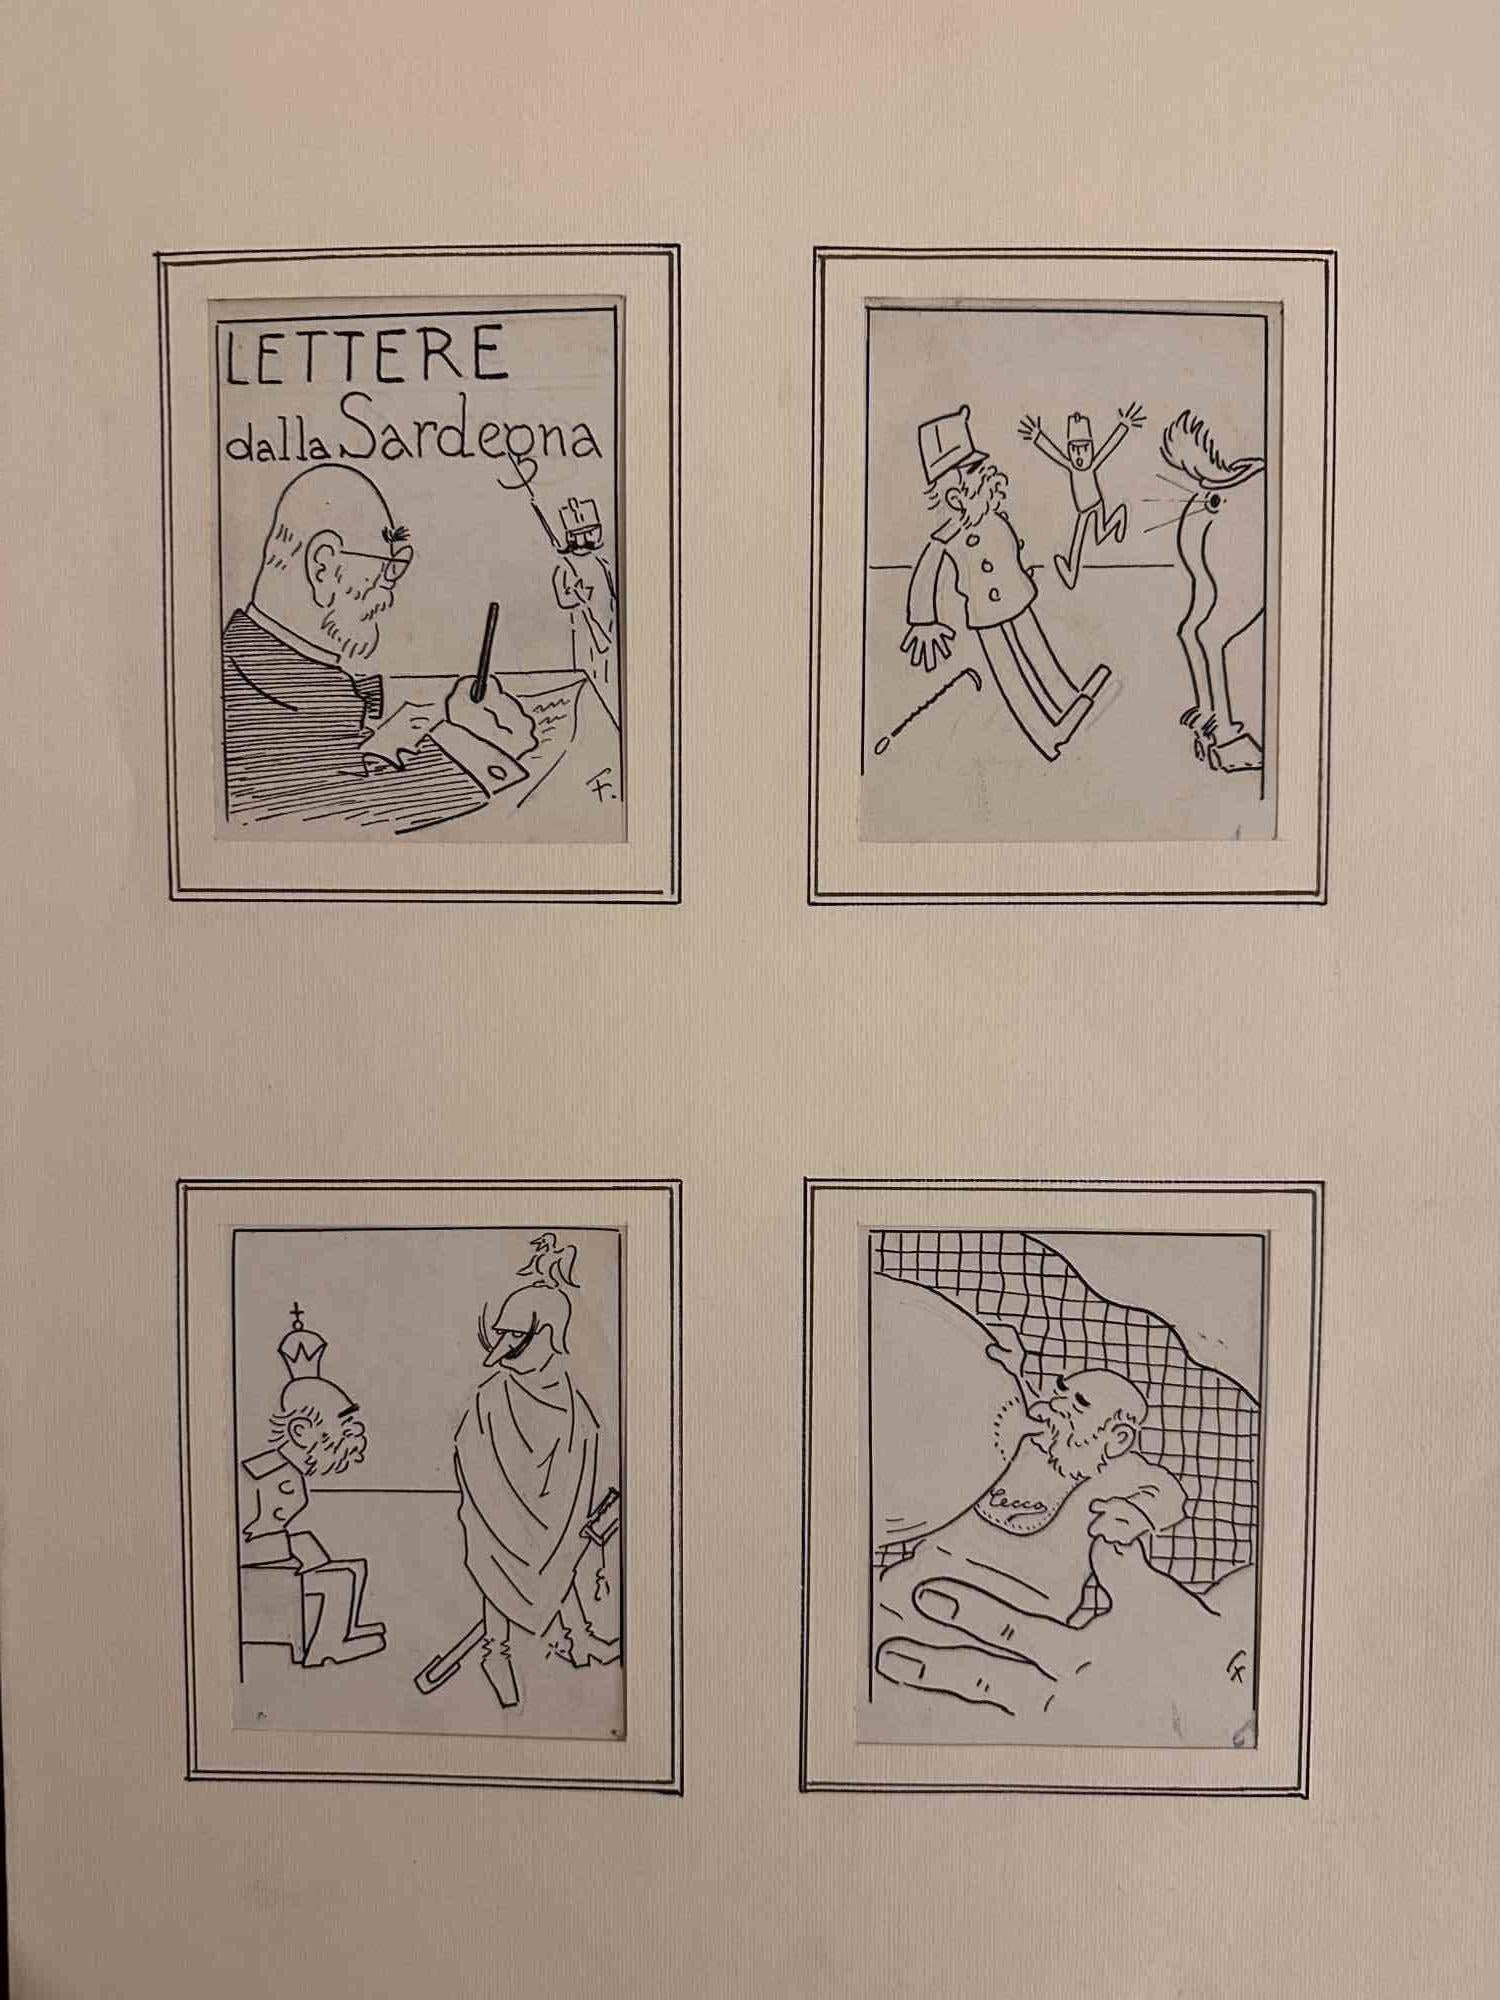 Letters to Sardinia is a modern artwork realized by Italian artist Filiberto Scarpelli  (Naples, 1870 - Rome, 1933).Four Separate artworks in one frame.  Original drawings realized in pen on paper. 

Passepartout is included (50 x 35 cm).

Good